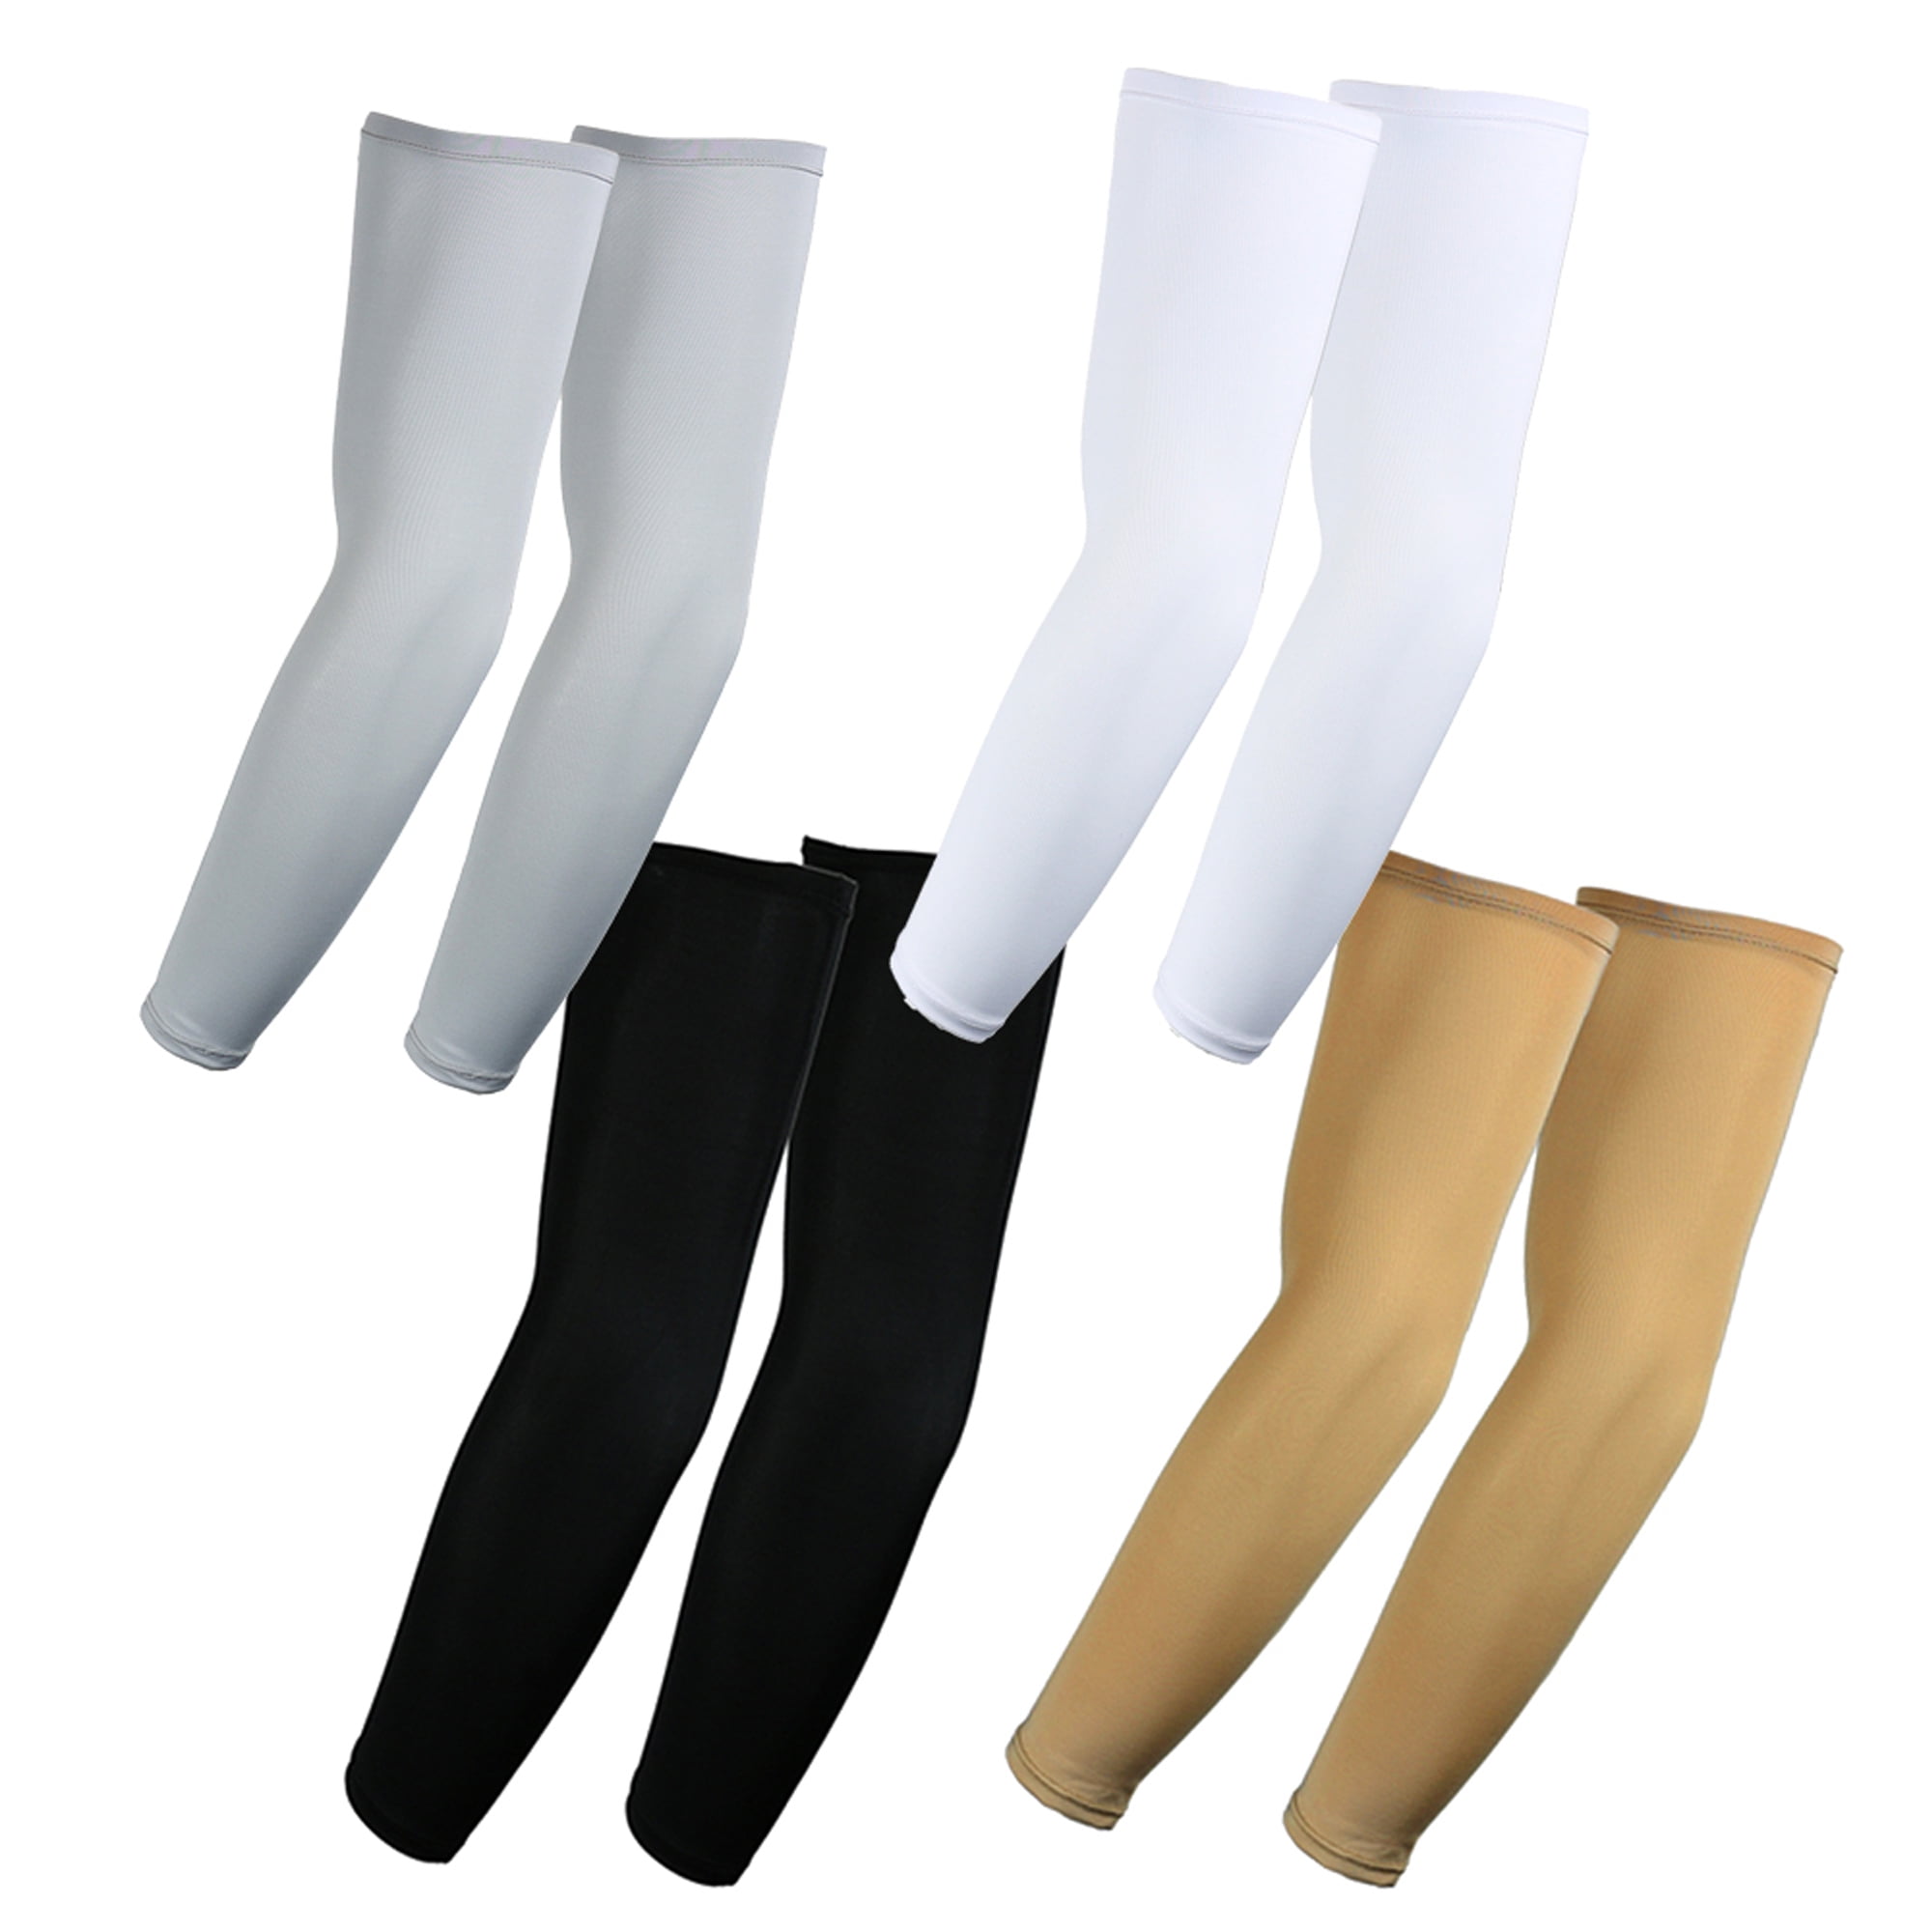 5*pairs Cooling Arm Sleeves Cover UV Sun Protection Basketball Sport White Black 